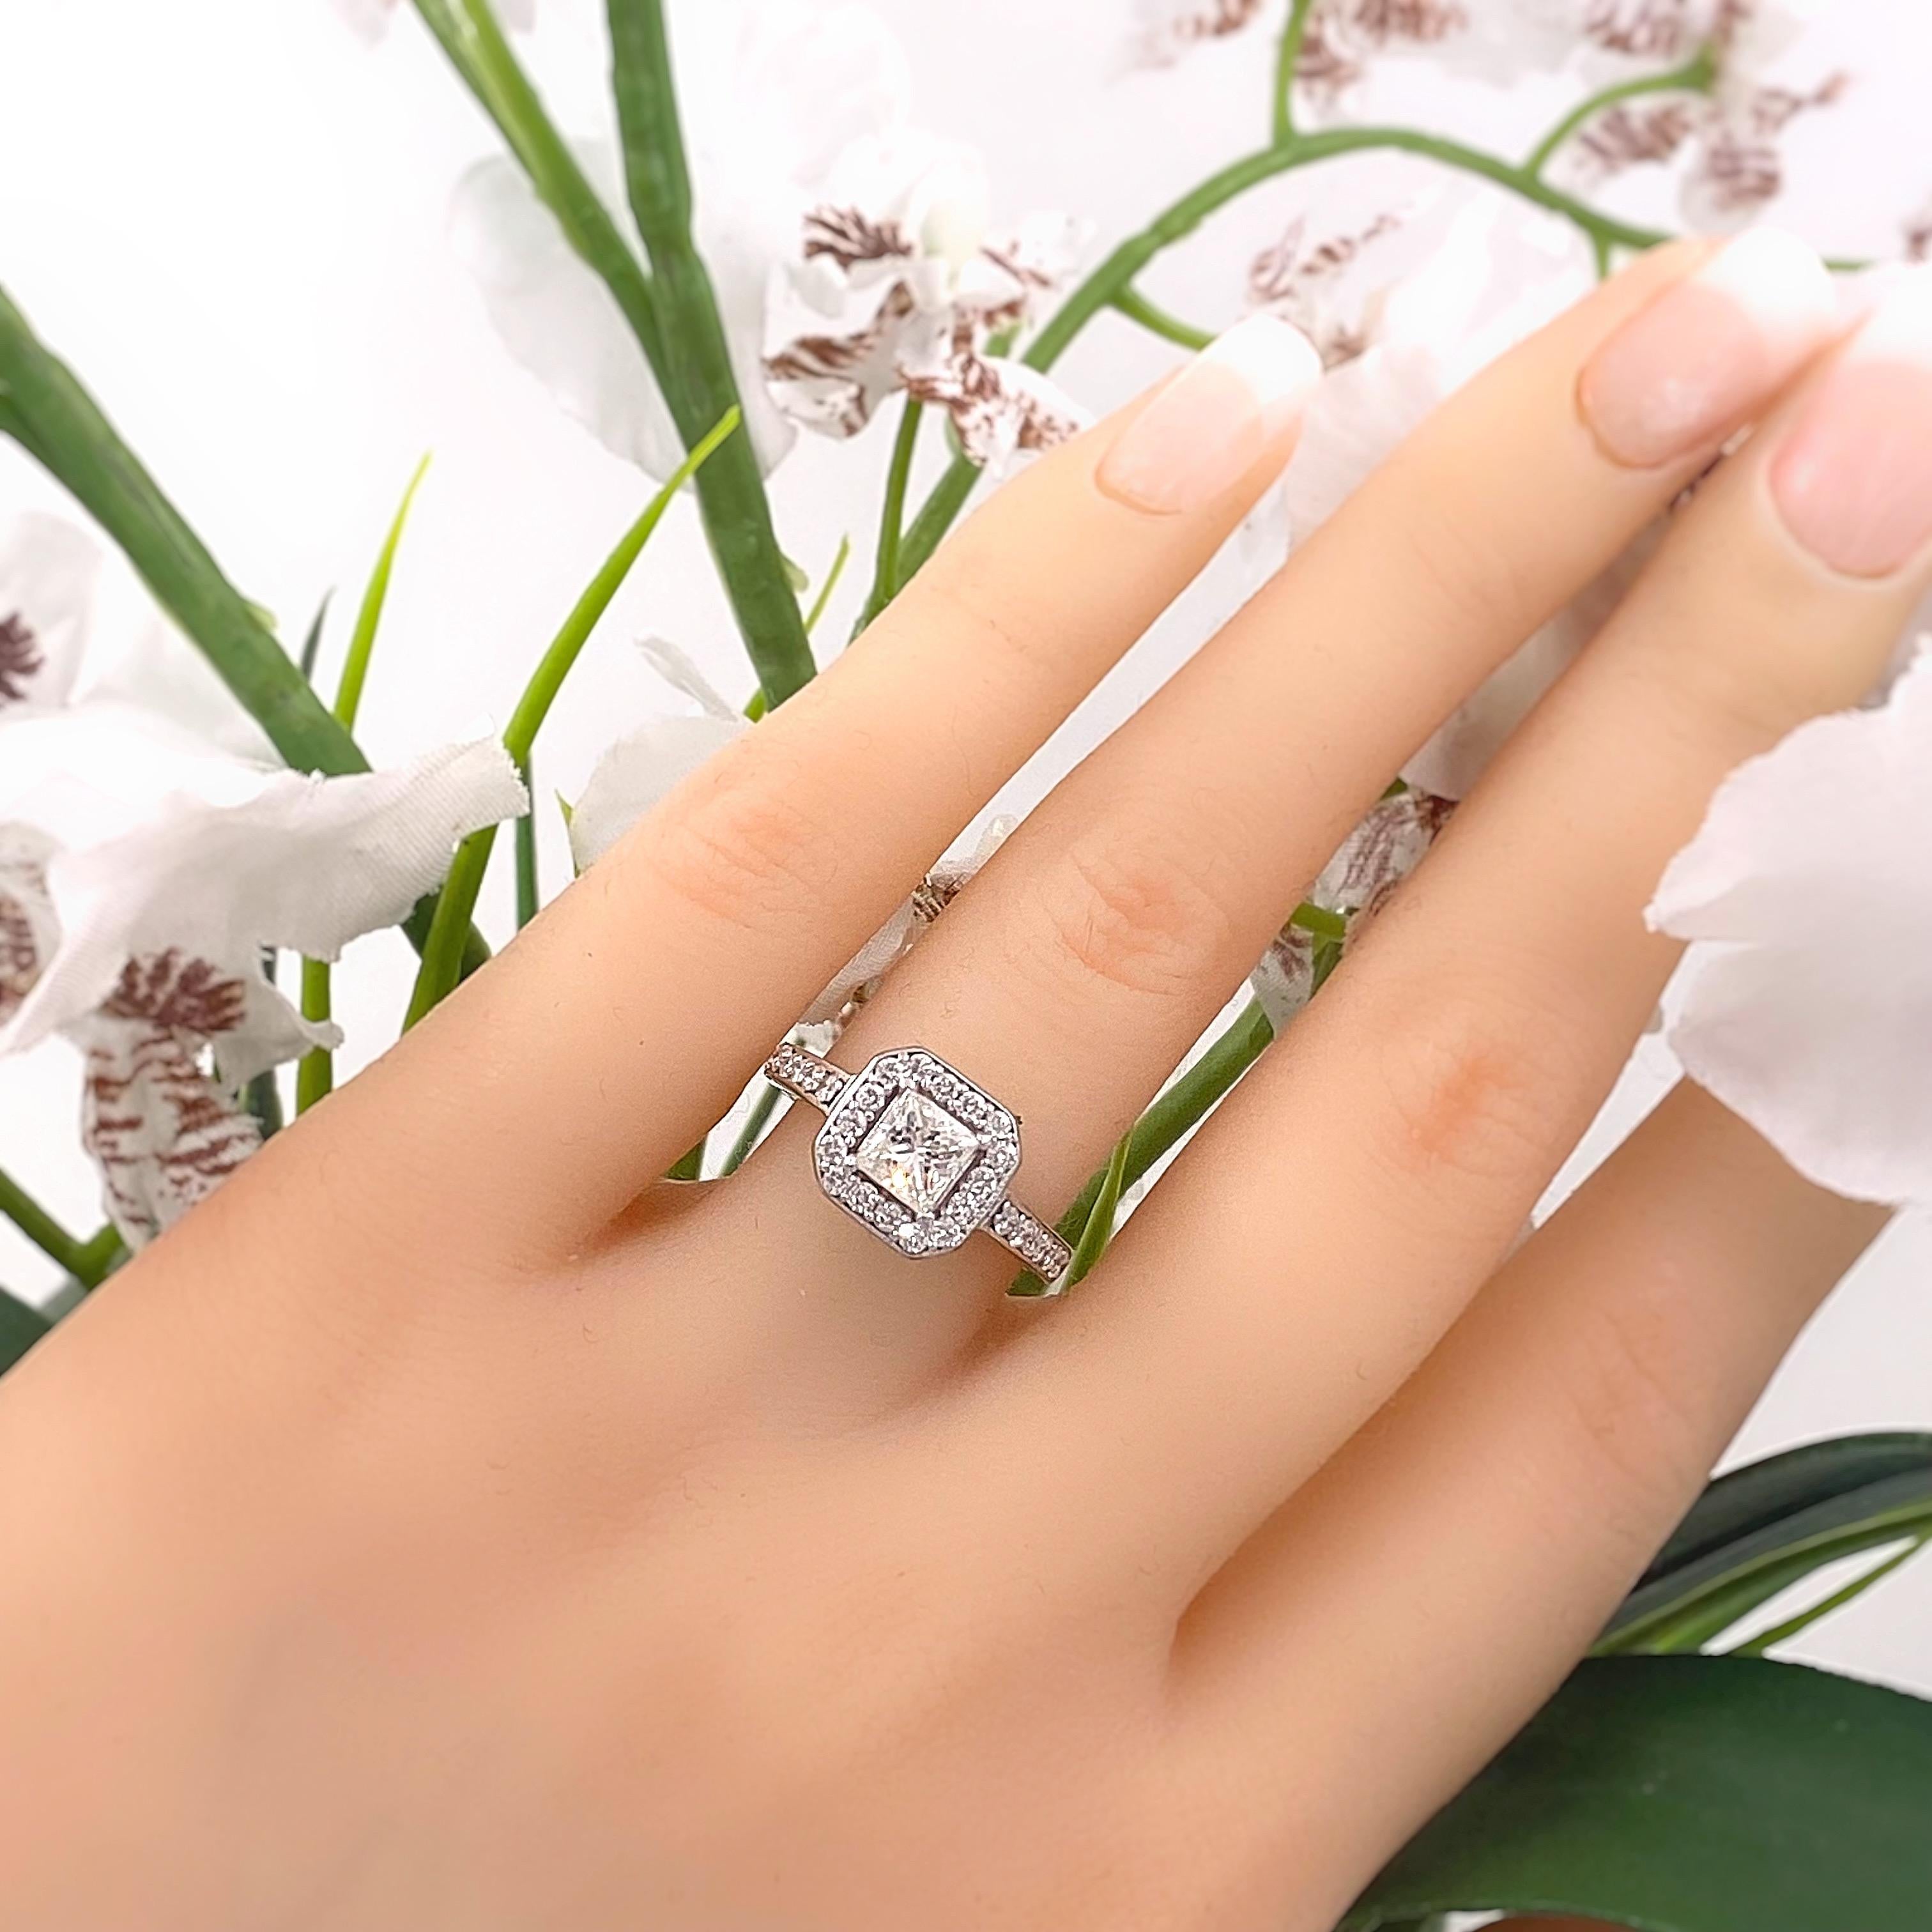 Princess Diamond Halo Engagement Ring
Style:  Halo with Diamond Band
Metal:  14kt White Gold
Size:  6 sizable
TCW:  1.45 tcw
Main Diamond:  Princess Cut Diamond 0.85 cts 
Color & Clarity:  G, I1
Accent Diamonds:   28 Round Brilliant Diamonds 0.60